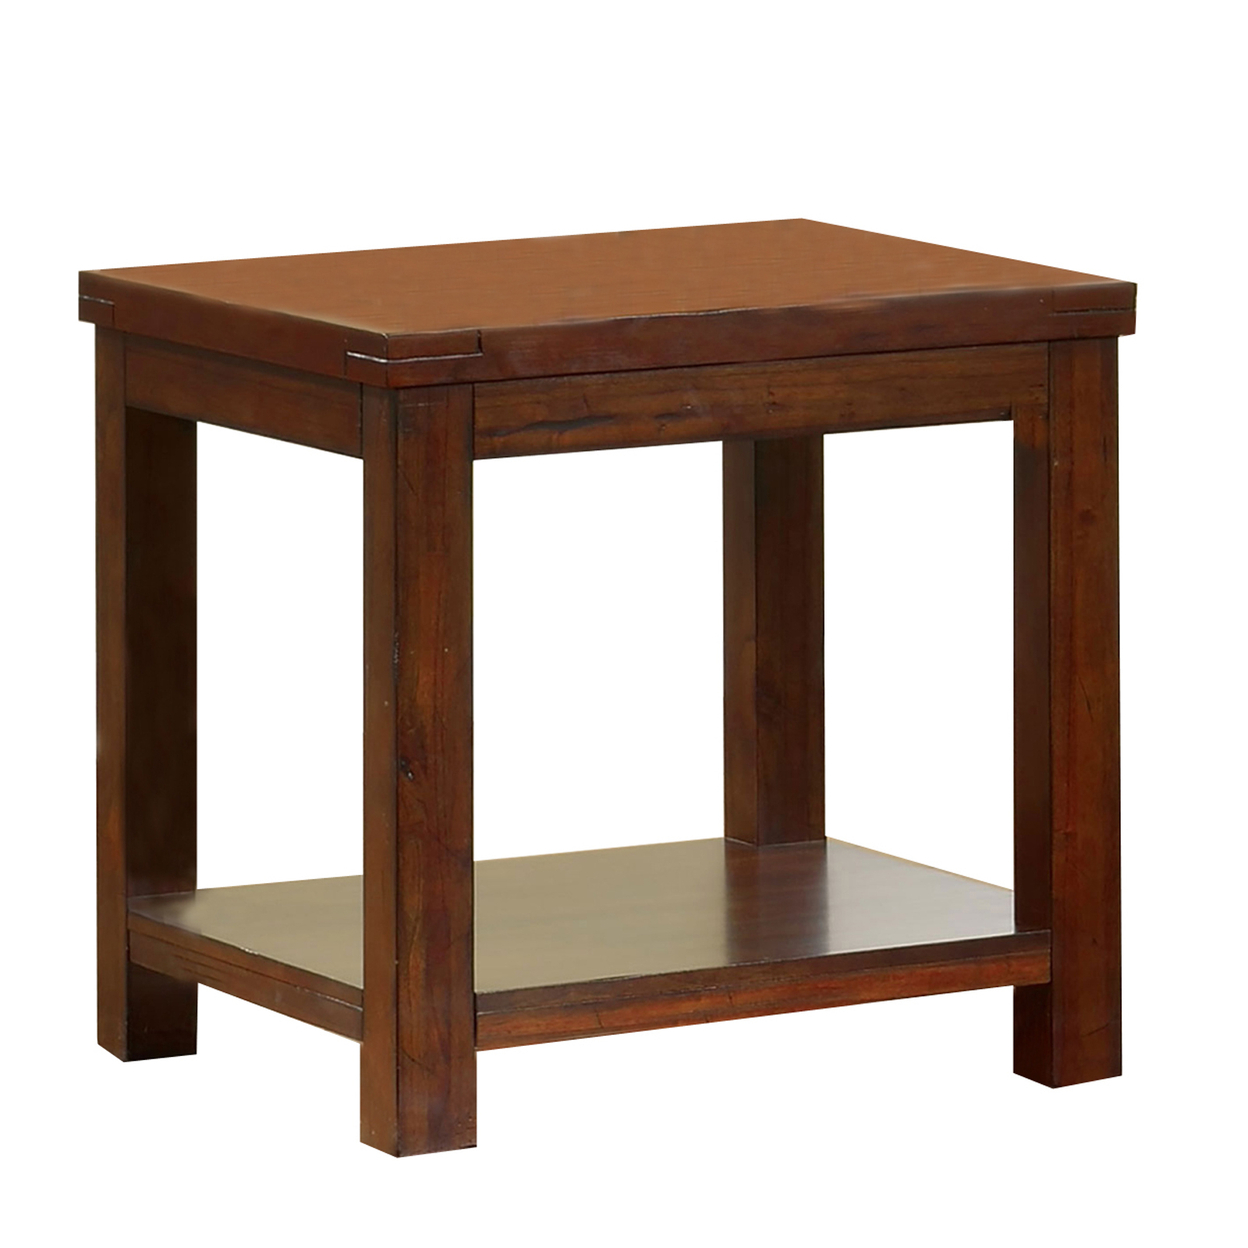 Square Shaped End Table With Open Bottom Shelf, Brown- Saltoro Sherpi